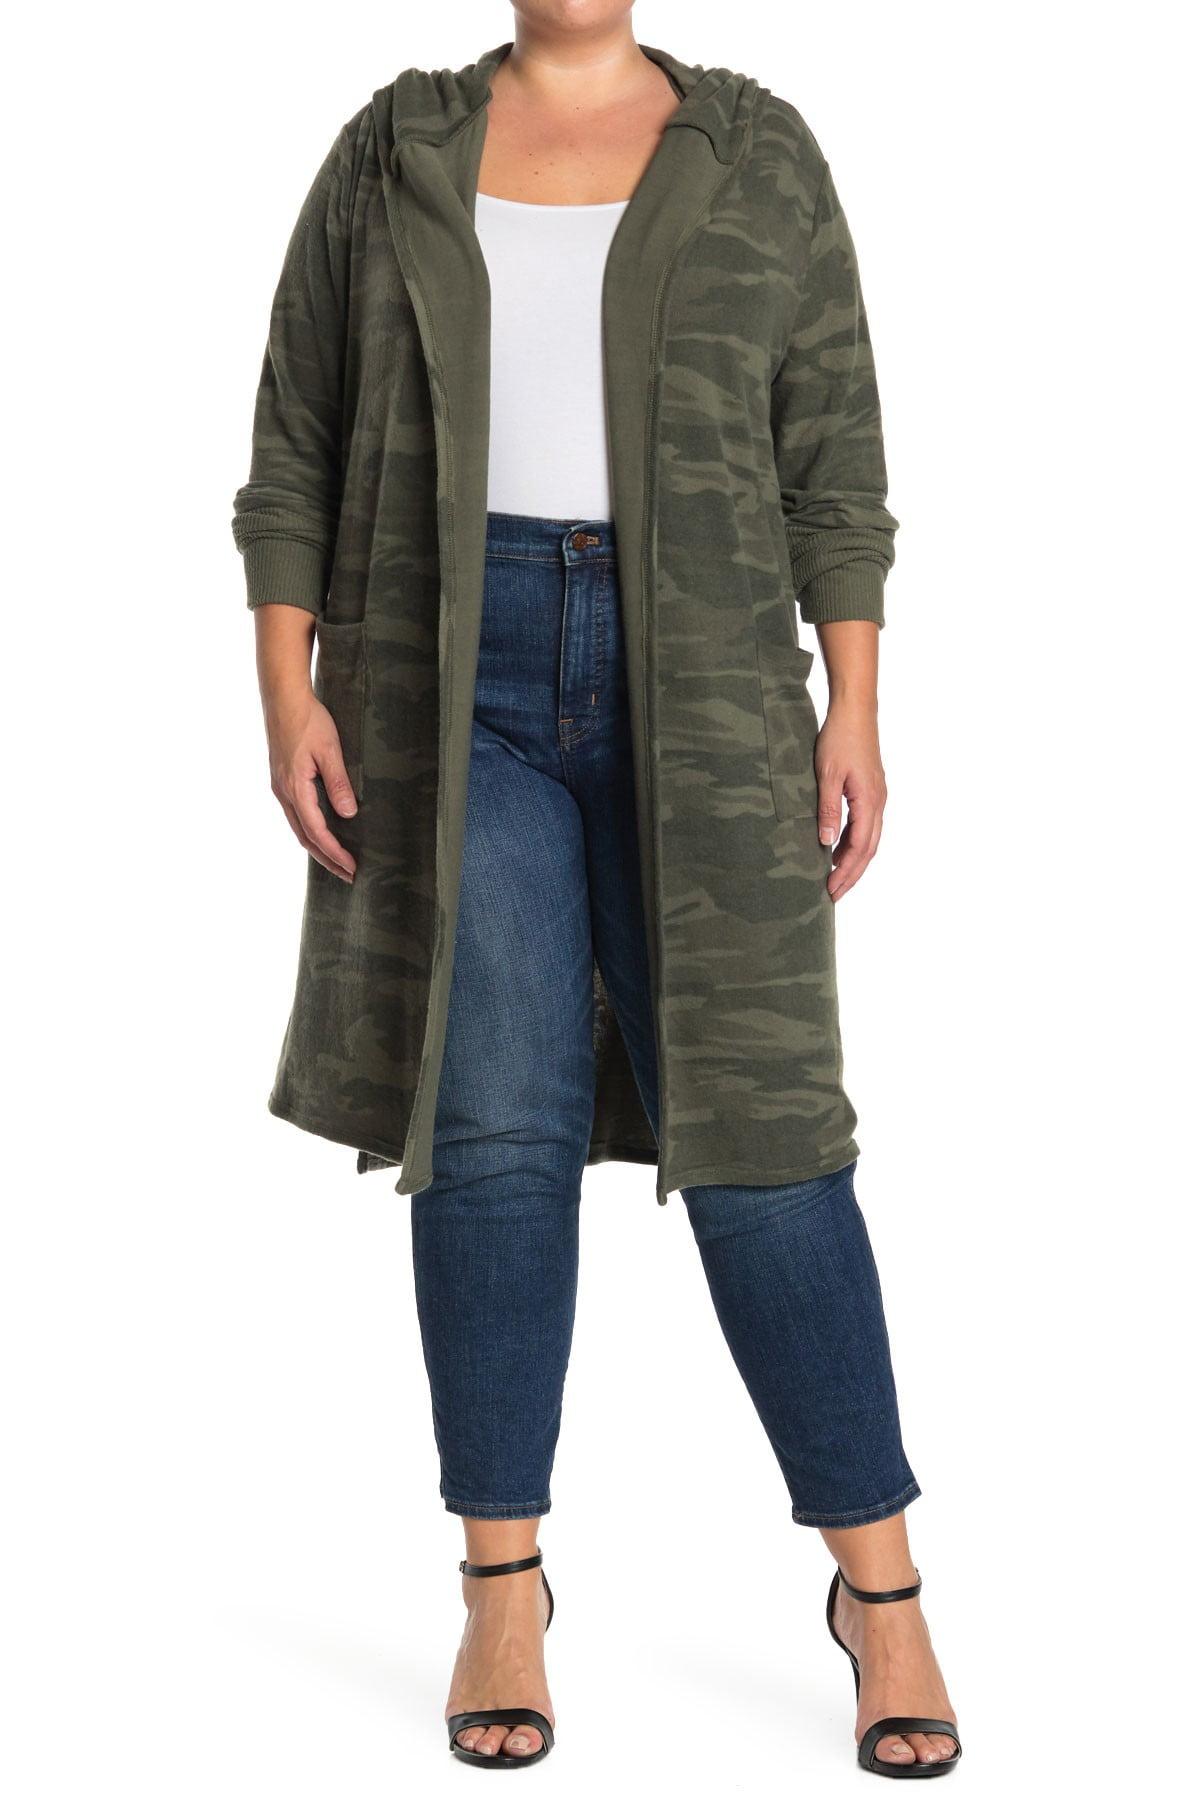 Sweet Romeo Synthetic Long Hooded Duster Cardigan in Washed Camo (Green) -  Lyst